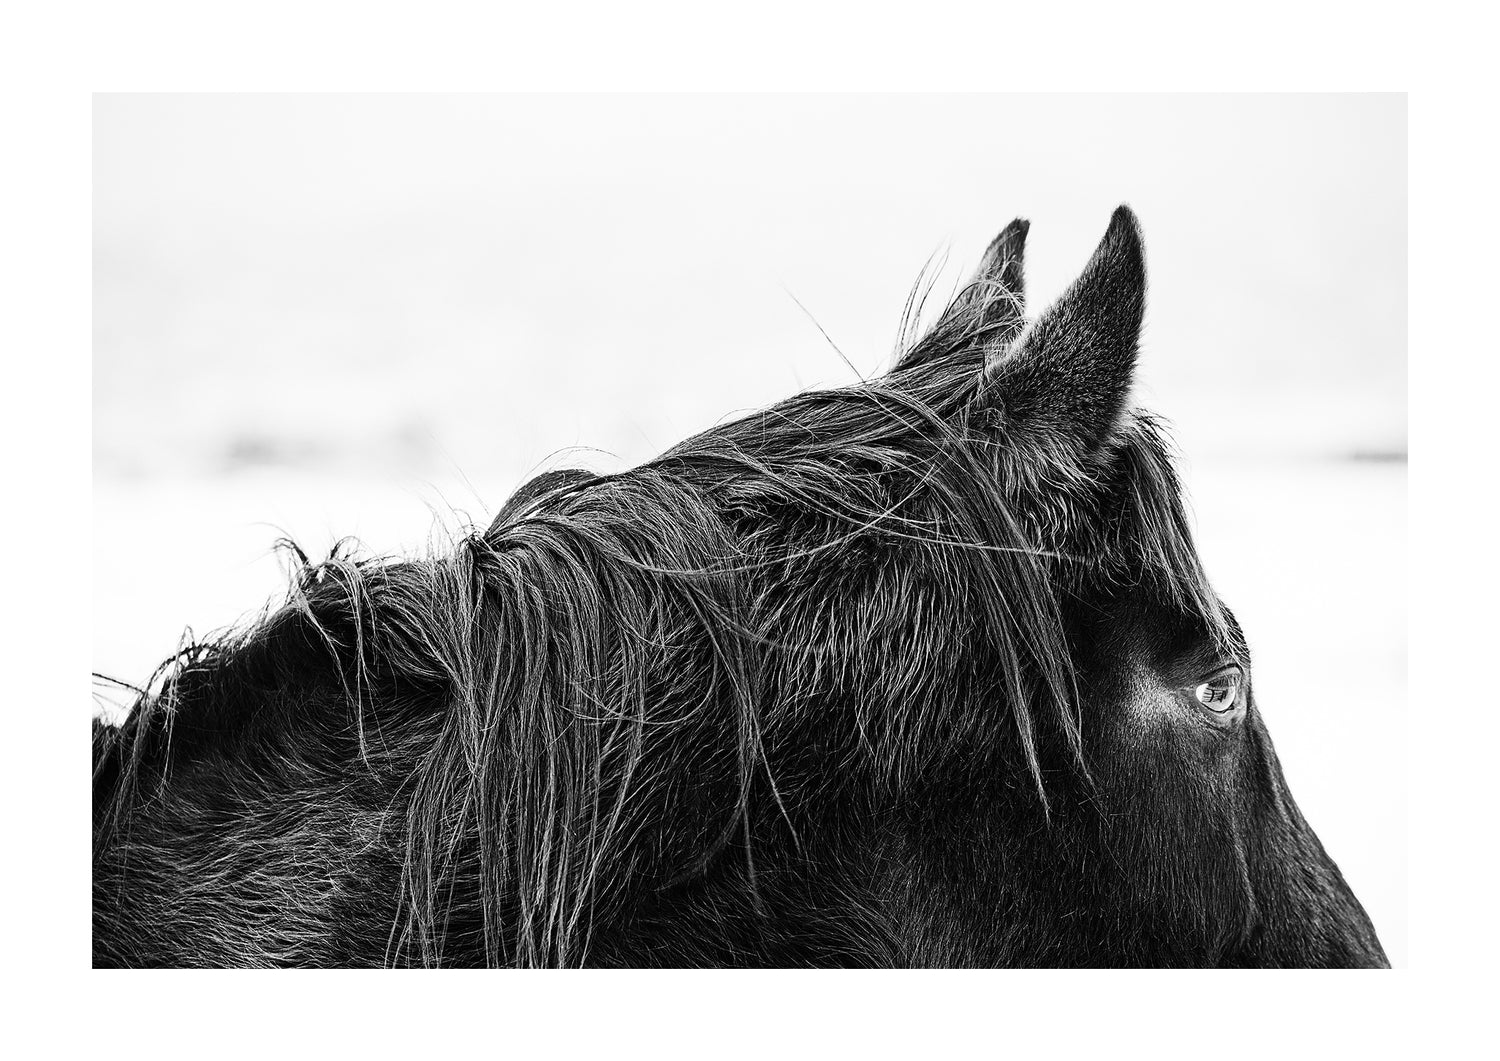 "Mystique" black and white photo of a black horses mane and face